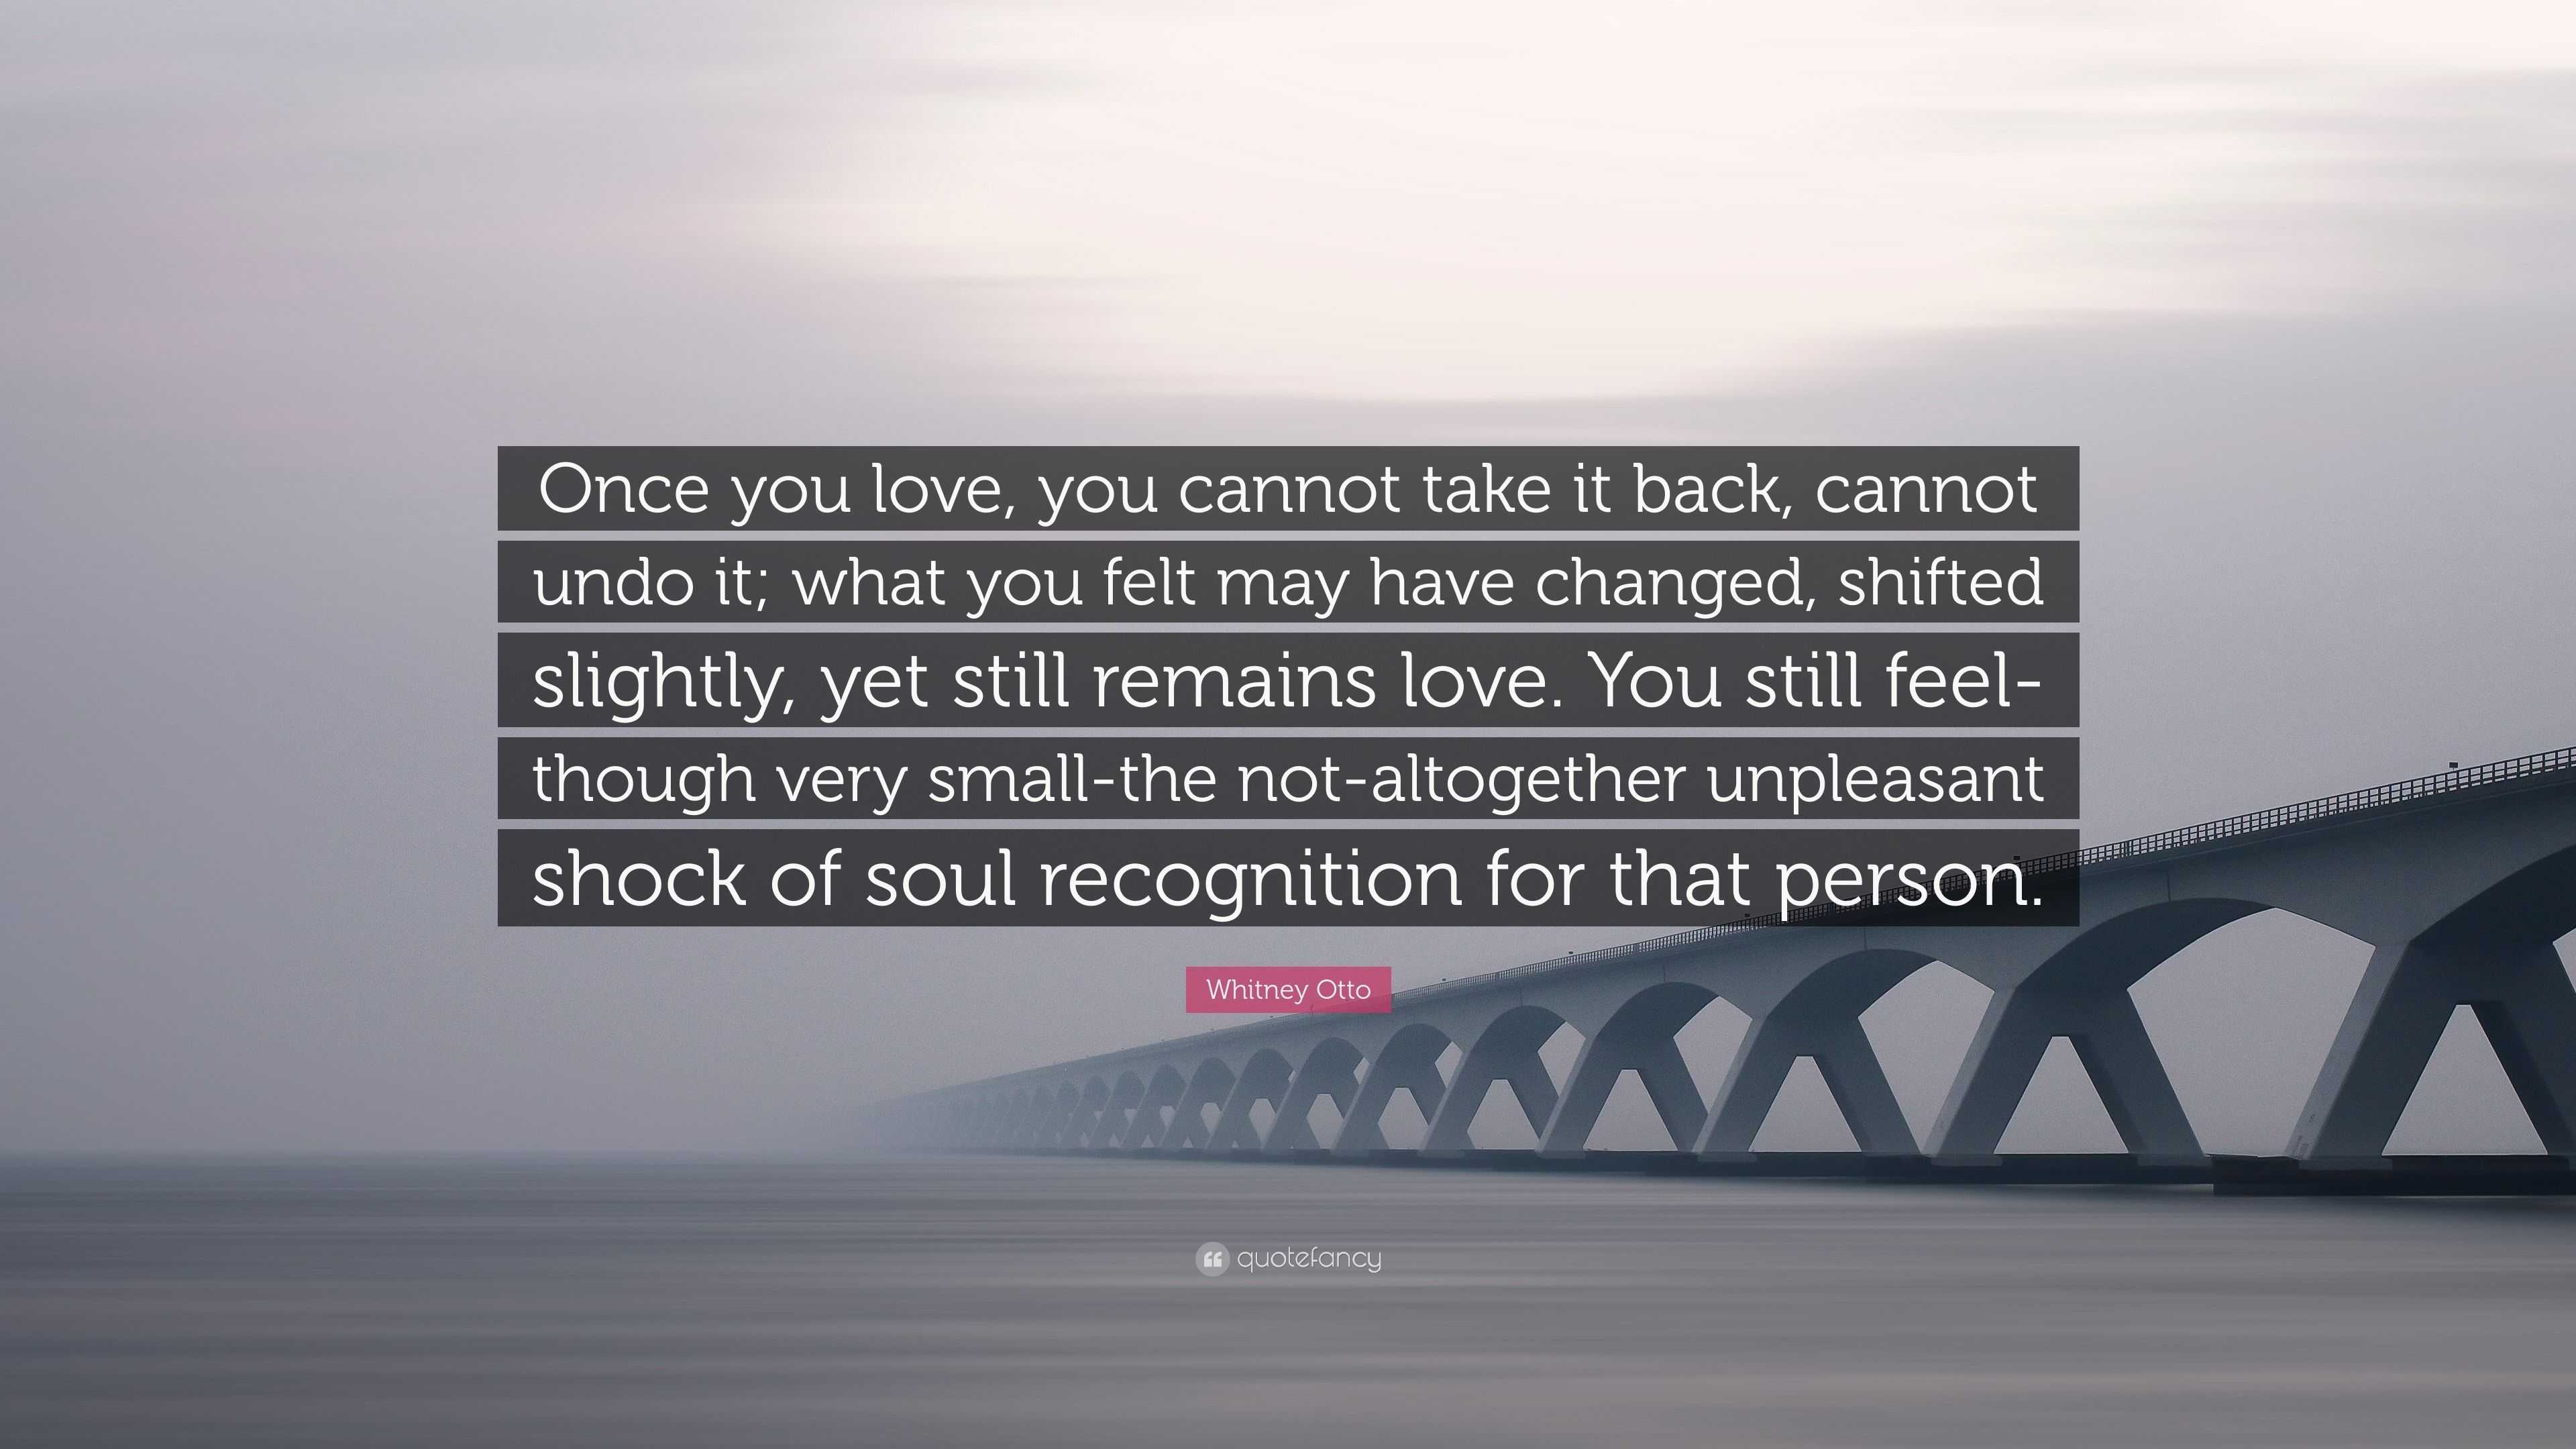 Whitney Otto Quote: “Once you love, you cannot take it back